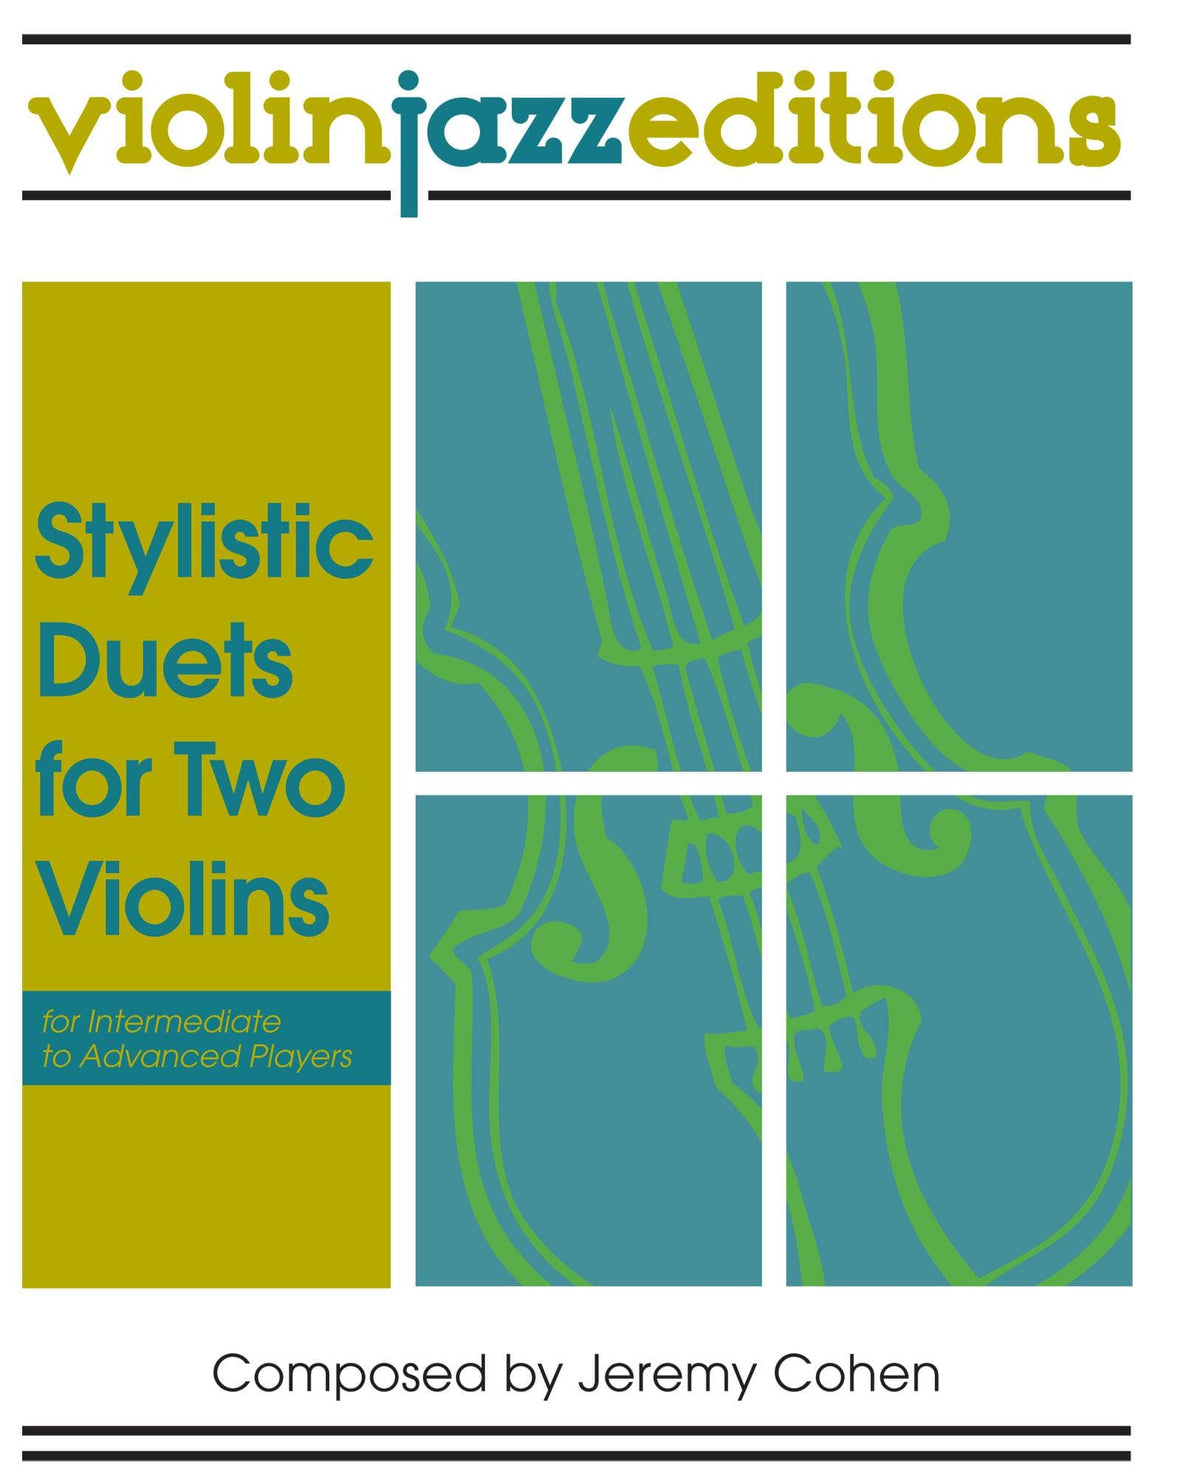 Cohen, Jeremy - Stylistic Duets for Two Violins - Violinjazz Editions - Book/CD Set